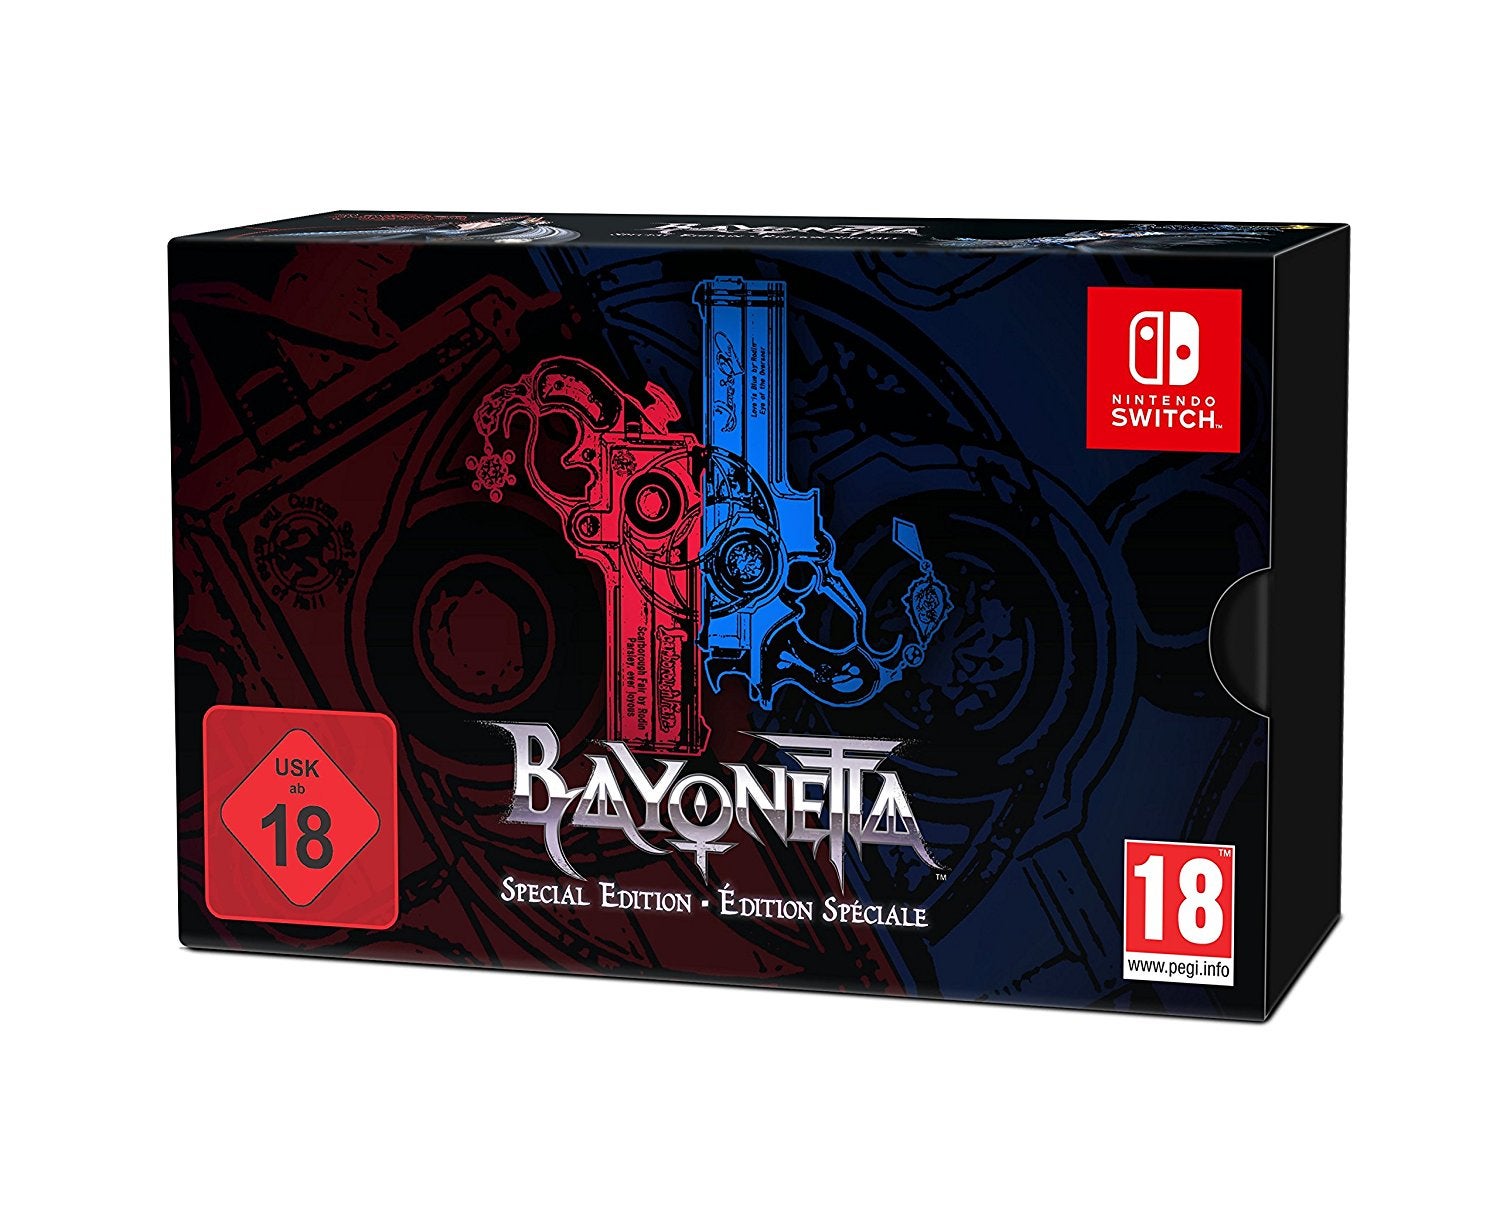 Image for Jelly Deals: Bayonetta 2 Special Edition up for pre-order